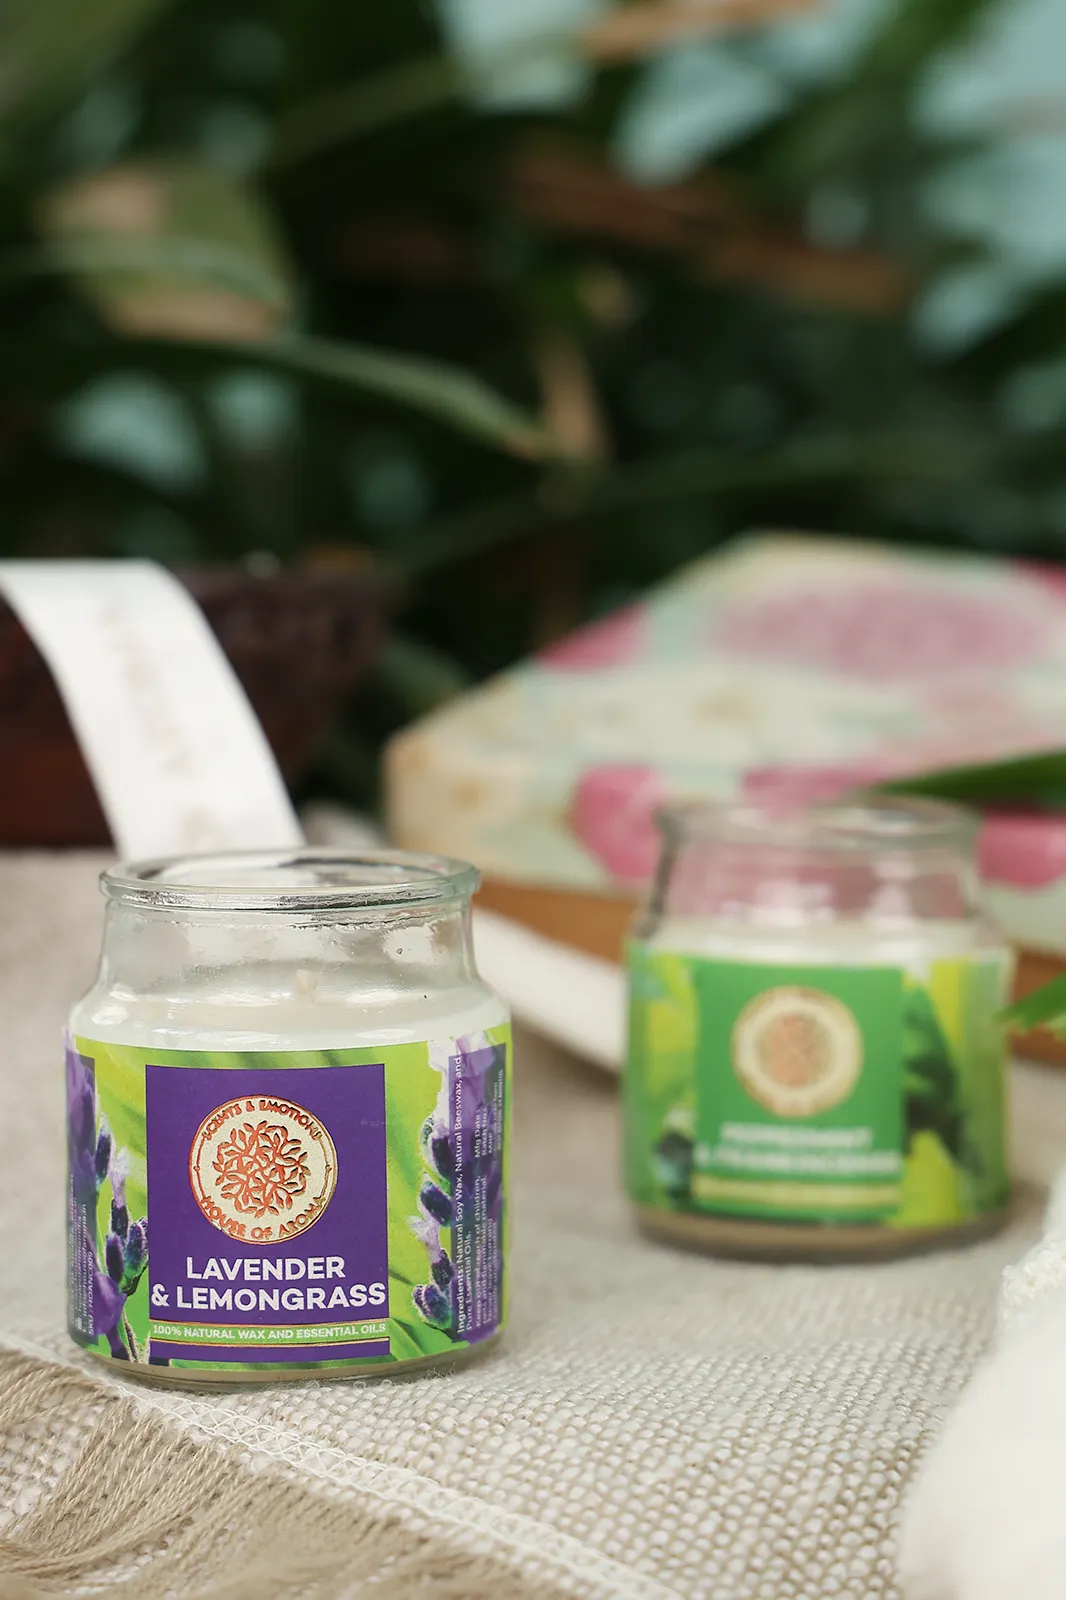 organic scented candles combo pack, organic scented candles, candles with aroma, scented candles pack, scented candles online, scented candles combo, soy candles, bees wax candles, scent soy candles, soy candles online, paraffin wax candles, wax candles, candles with aroma, house of aroma